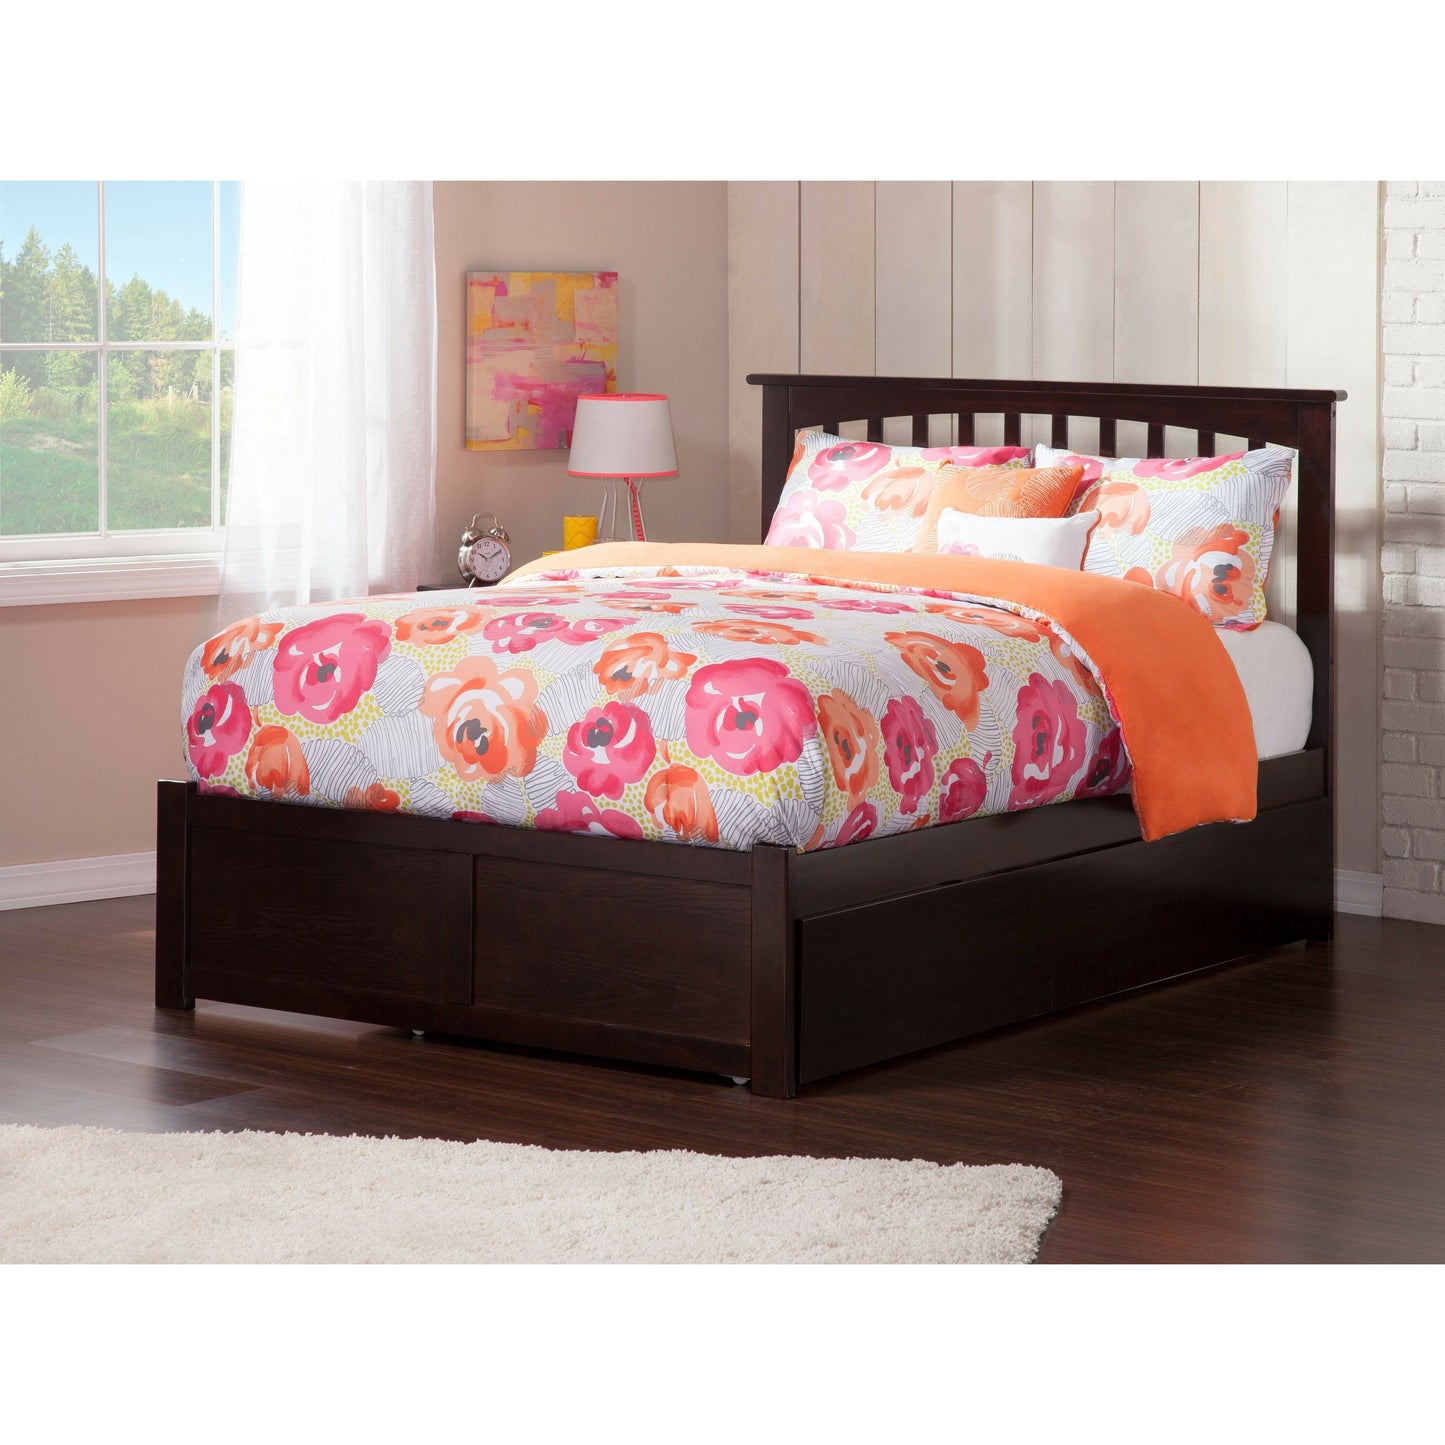 Atlantic Furniture Bed Mission Full Platform Bed with Flat Panel Foot Board and Twin Size Urban Trundle Bed in Espresso